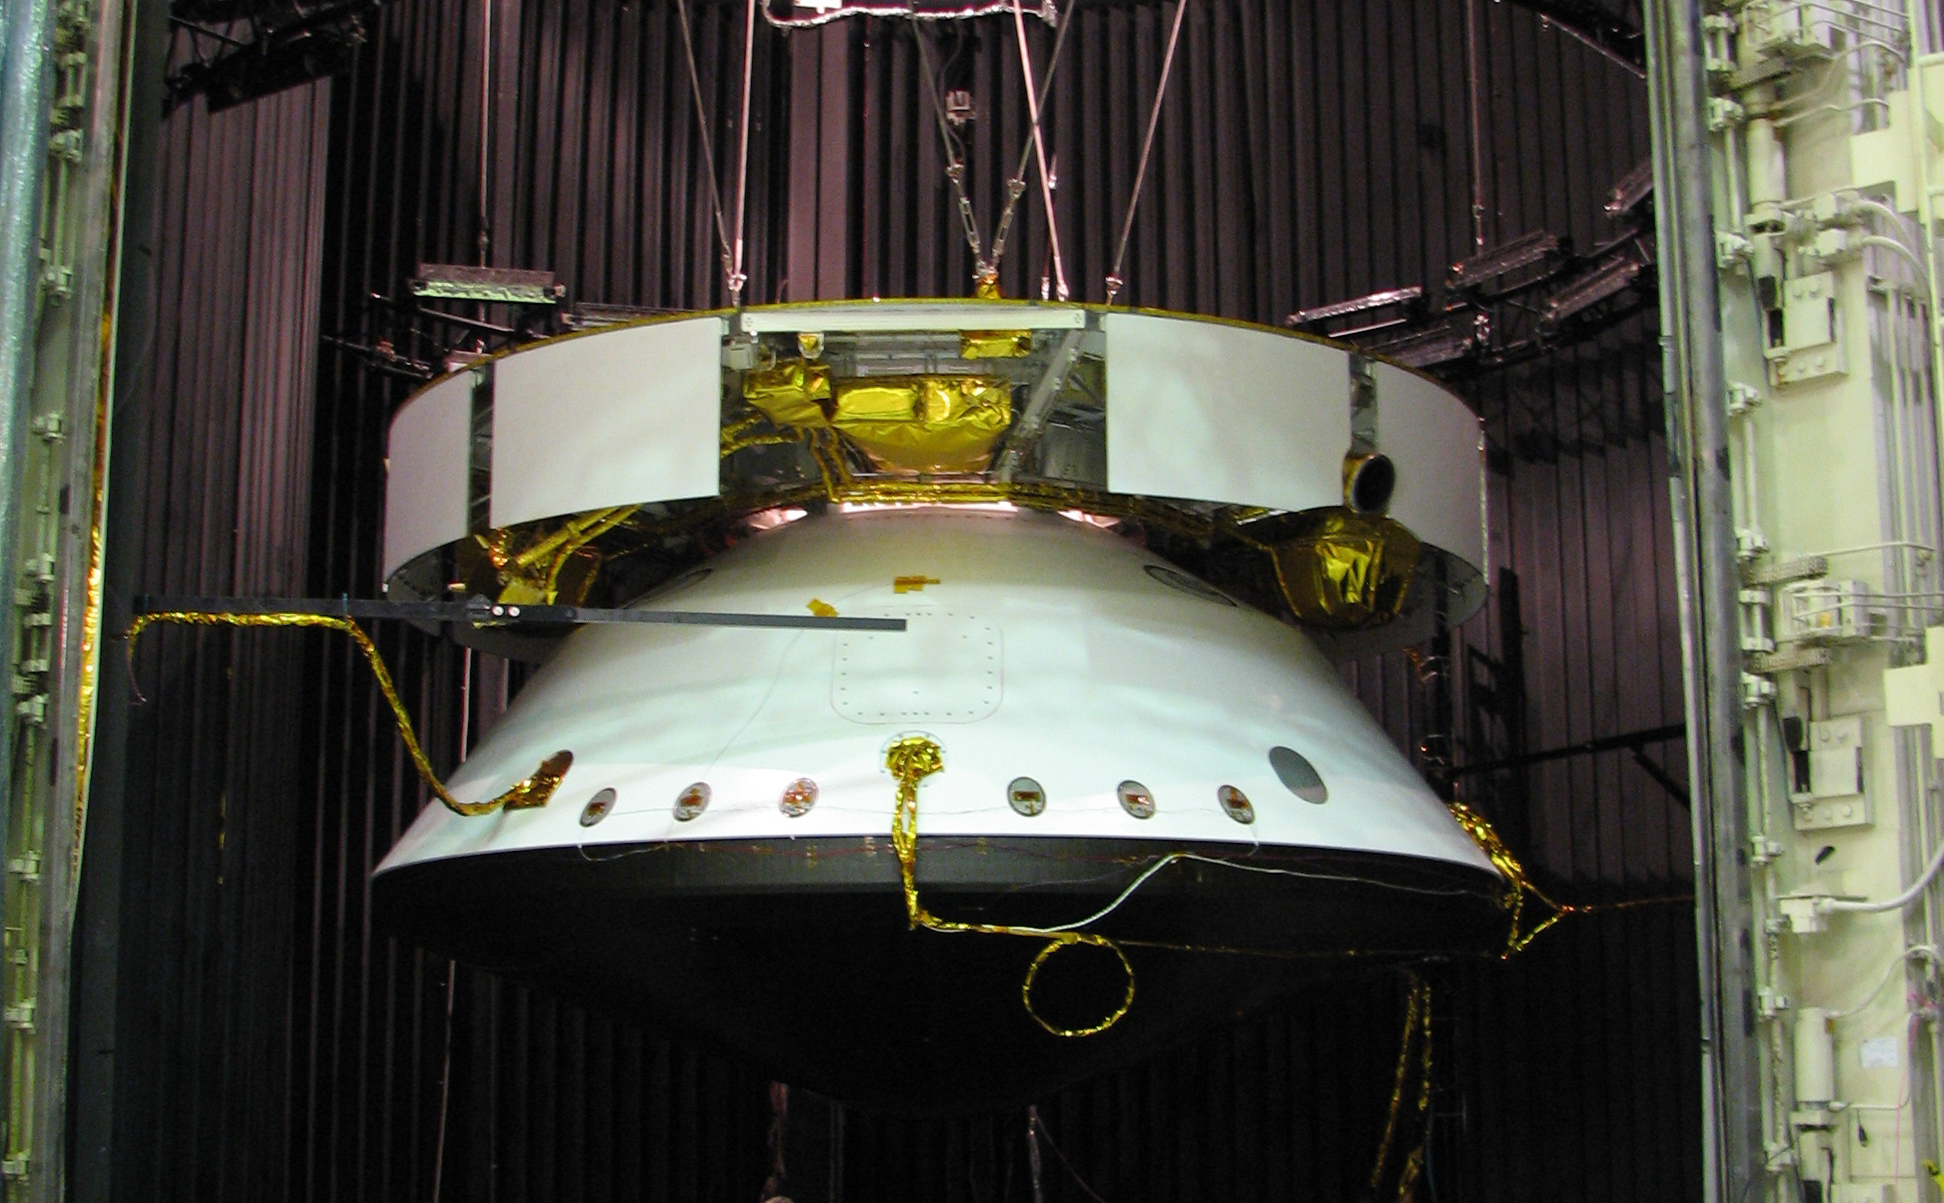 This image shows the Mars Science Laboratory spacecraft is suspended in a dark chamber, awaiting an environmental test.